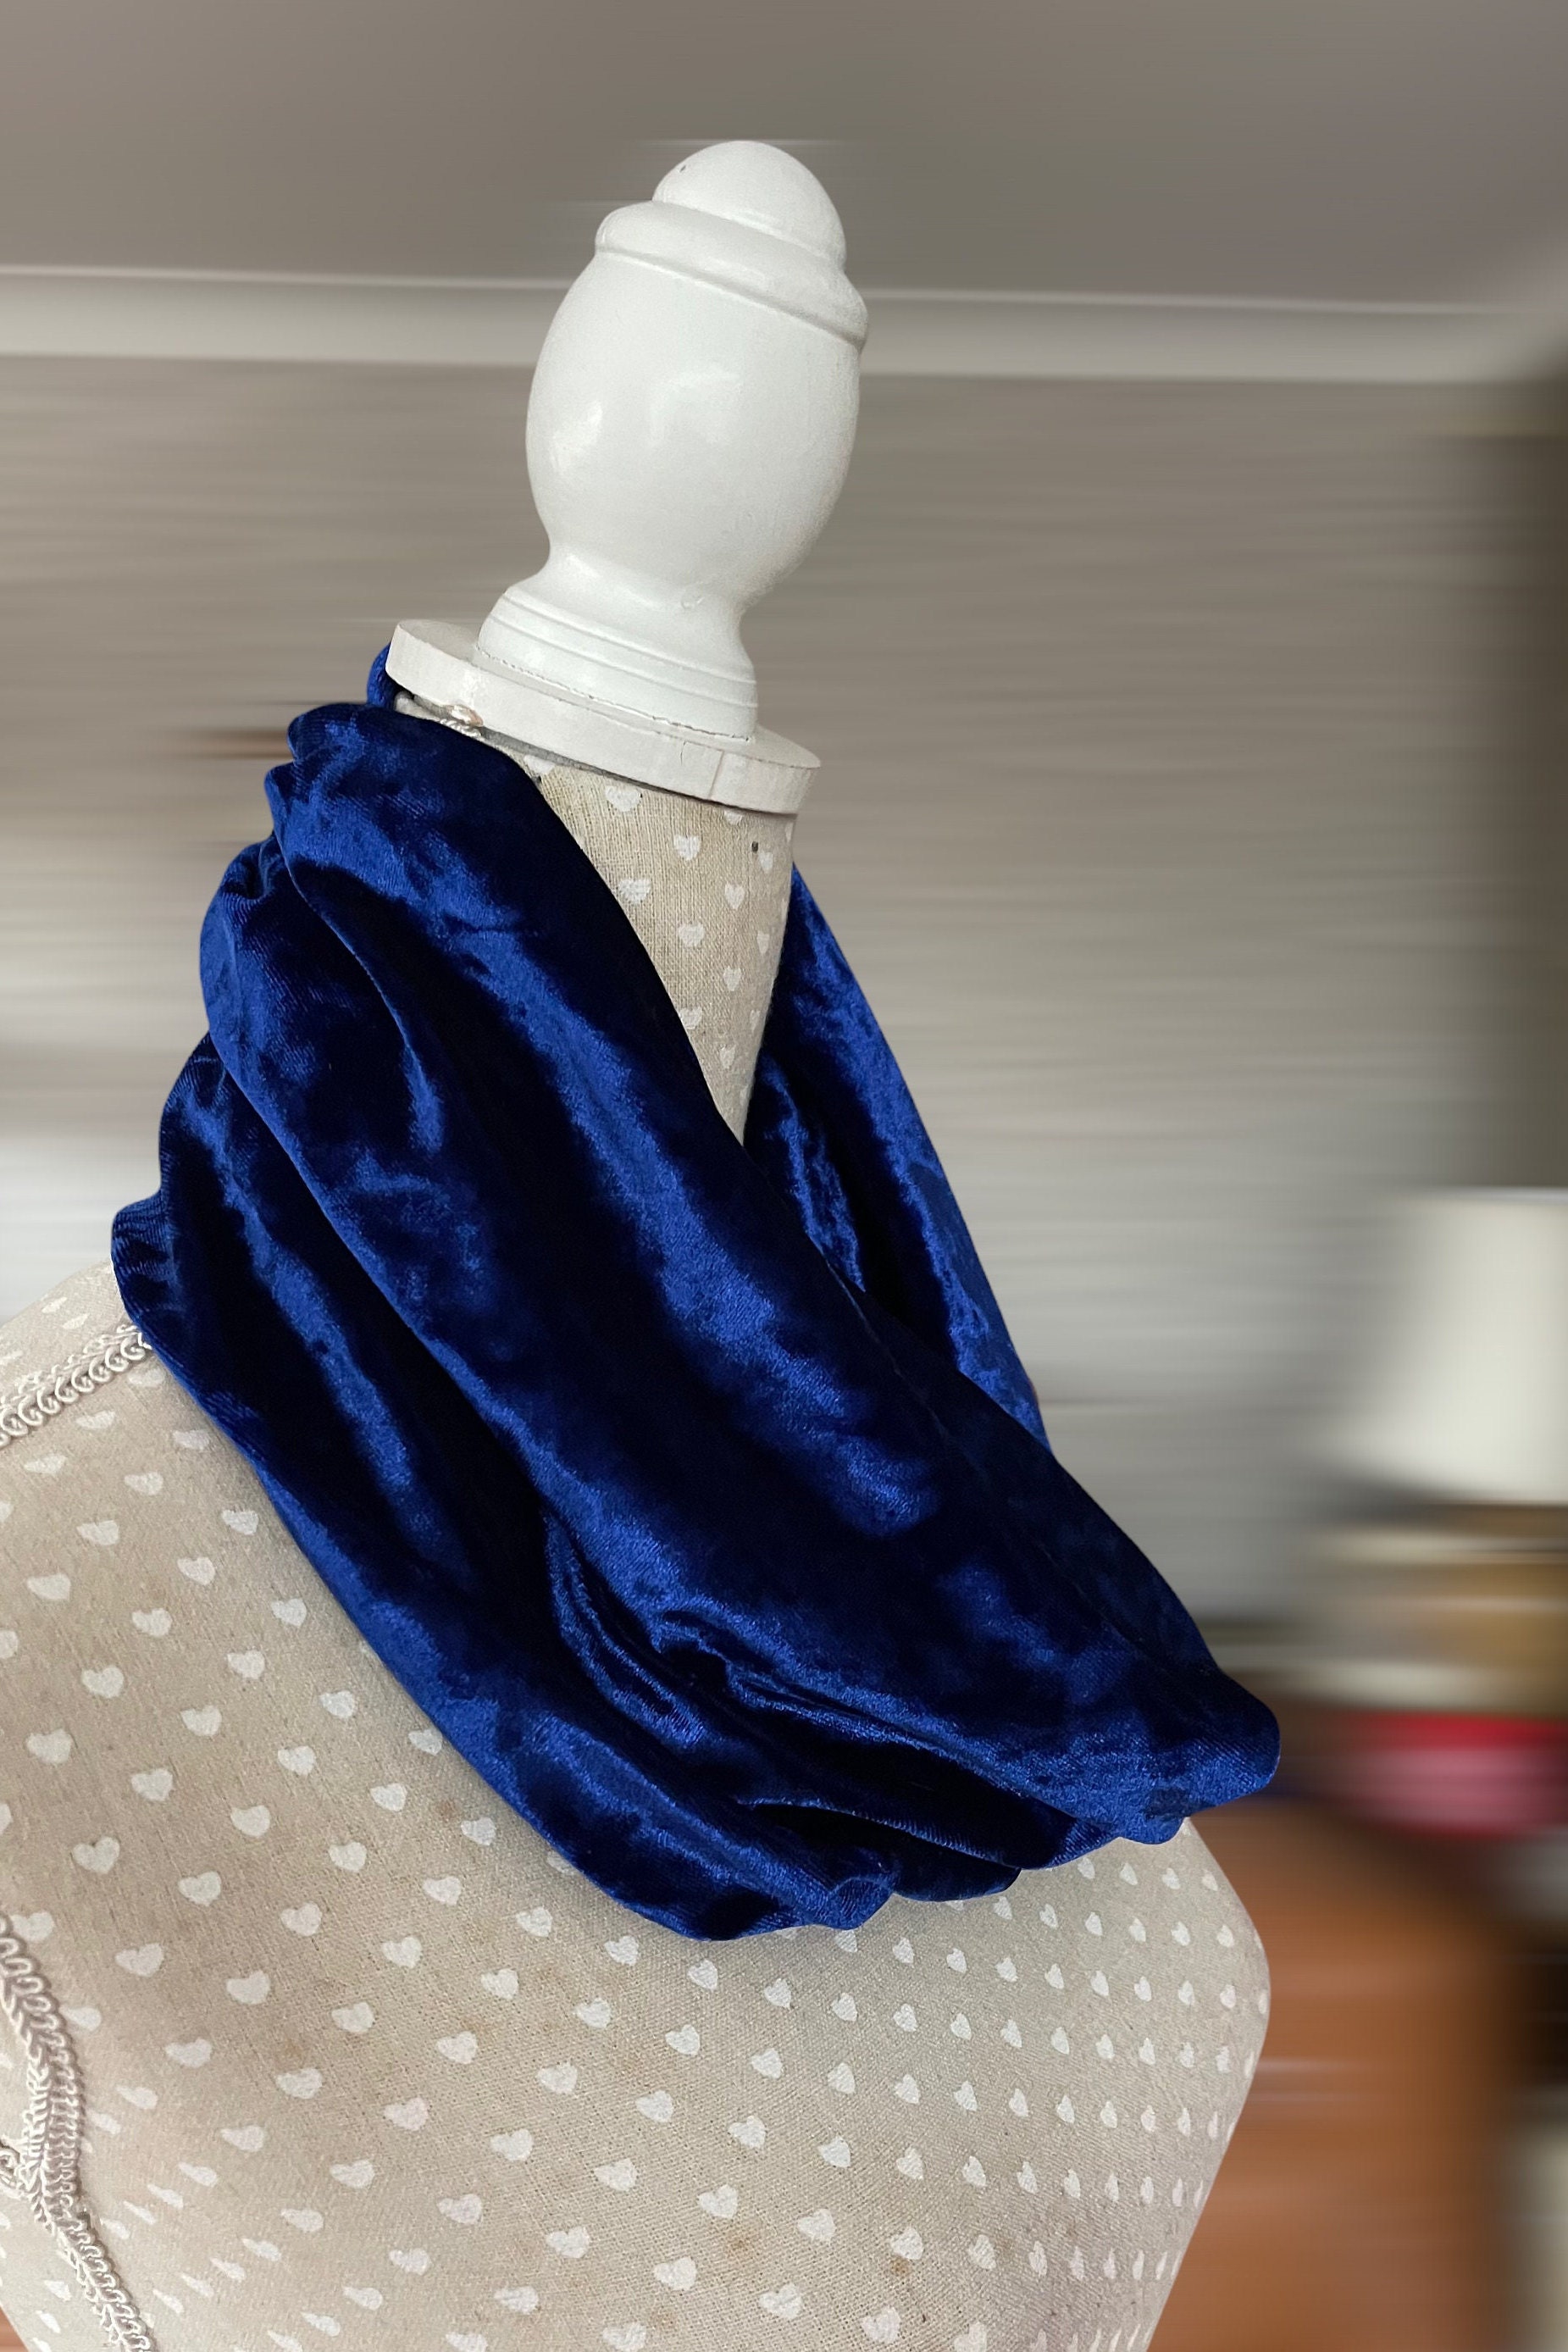 Crushed Velvet Fabric Material Stretch Velour. 150cm Wide Sold by the Metre  ROYAL BLUE 